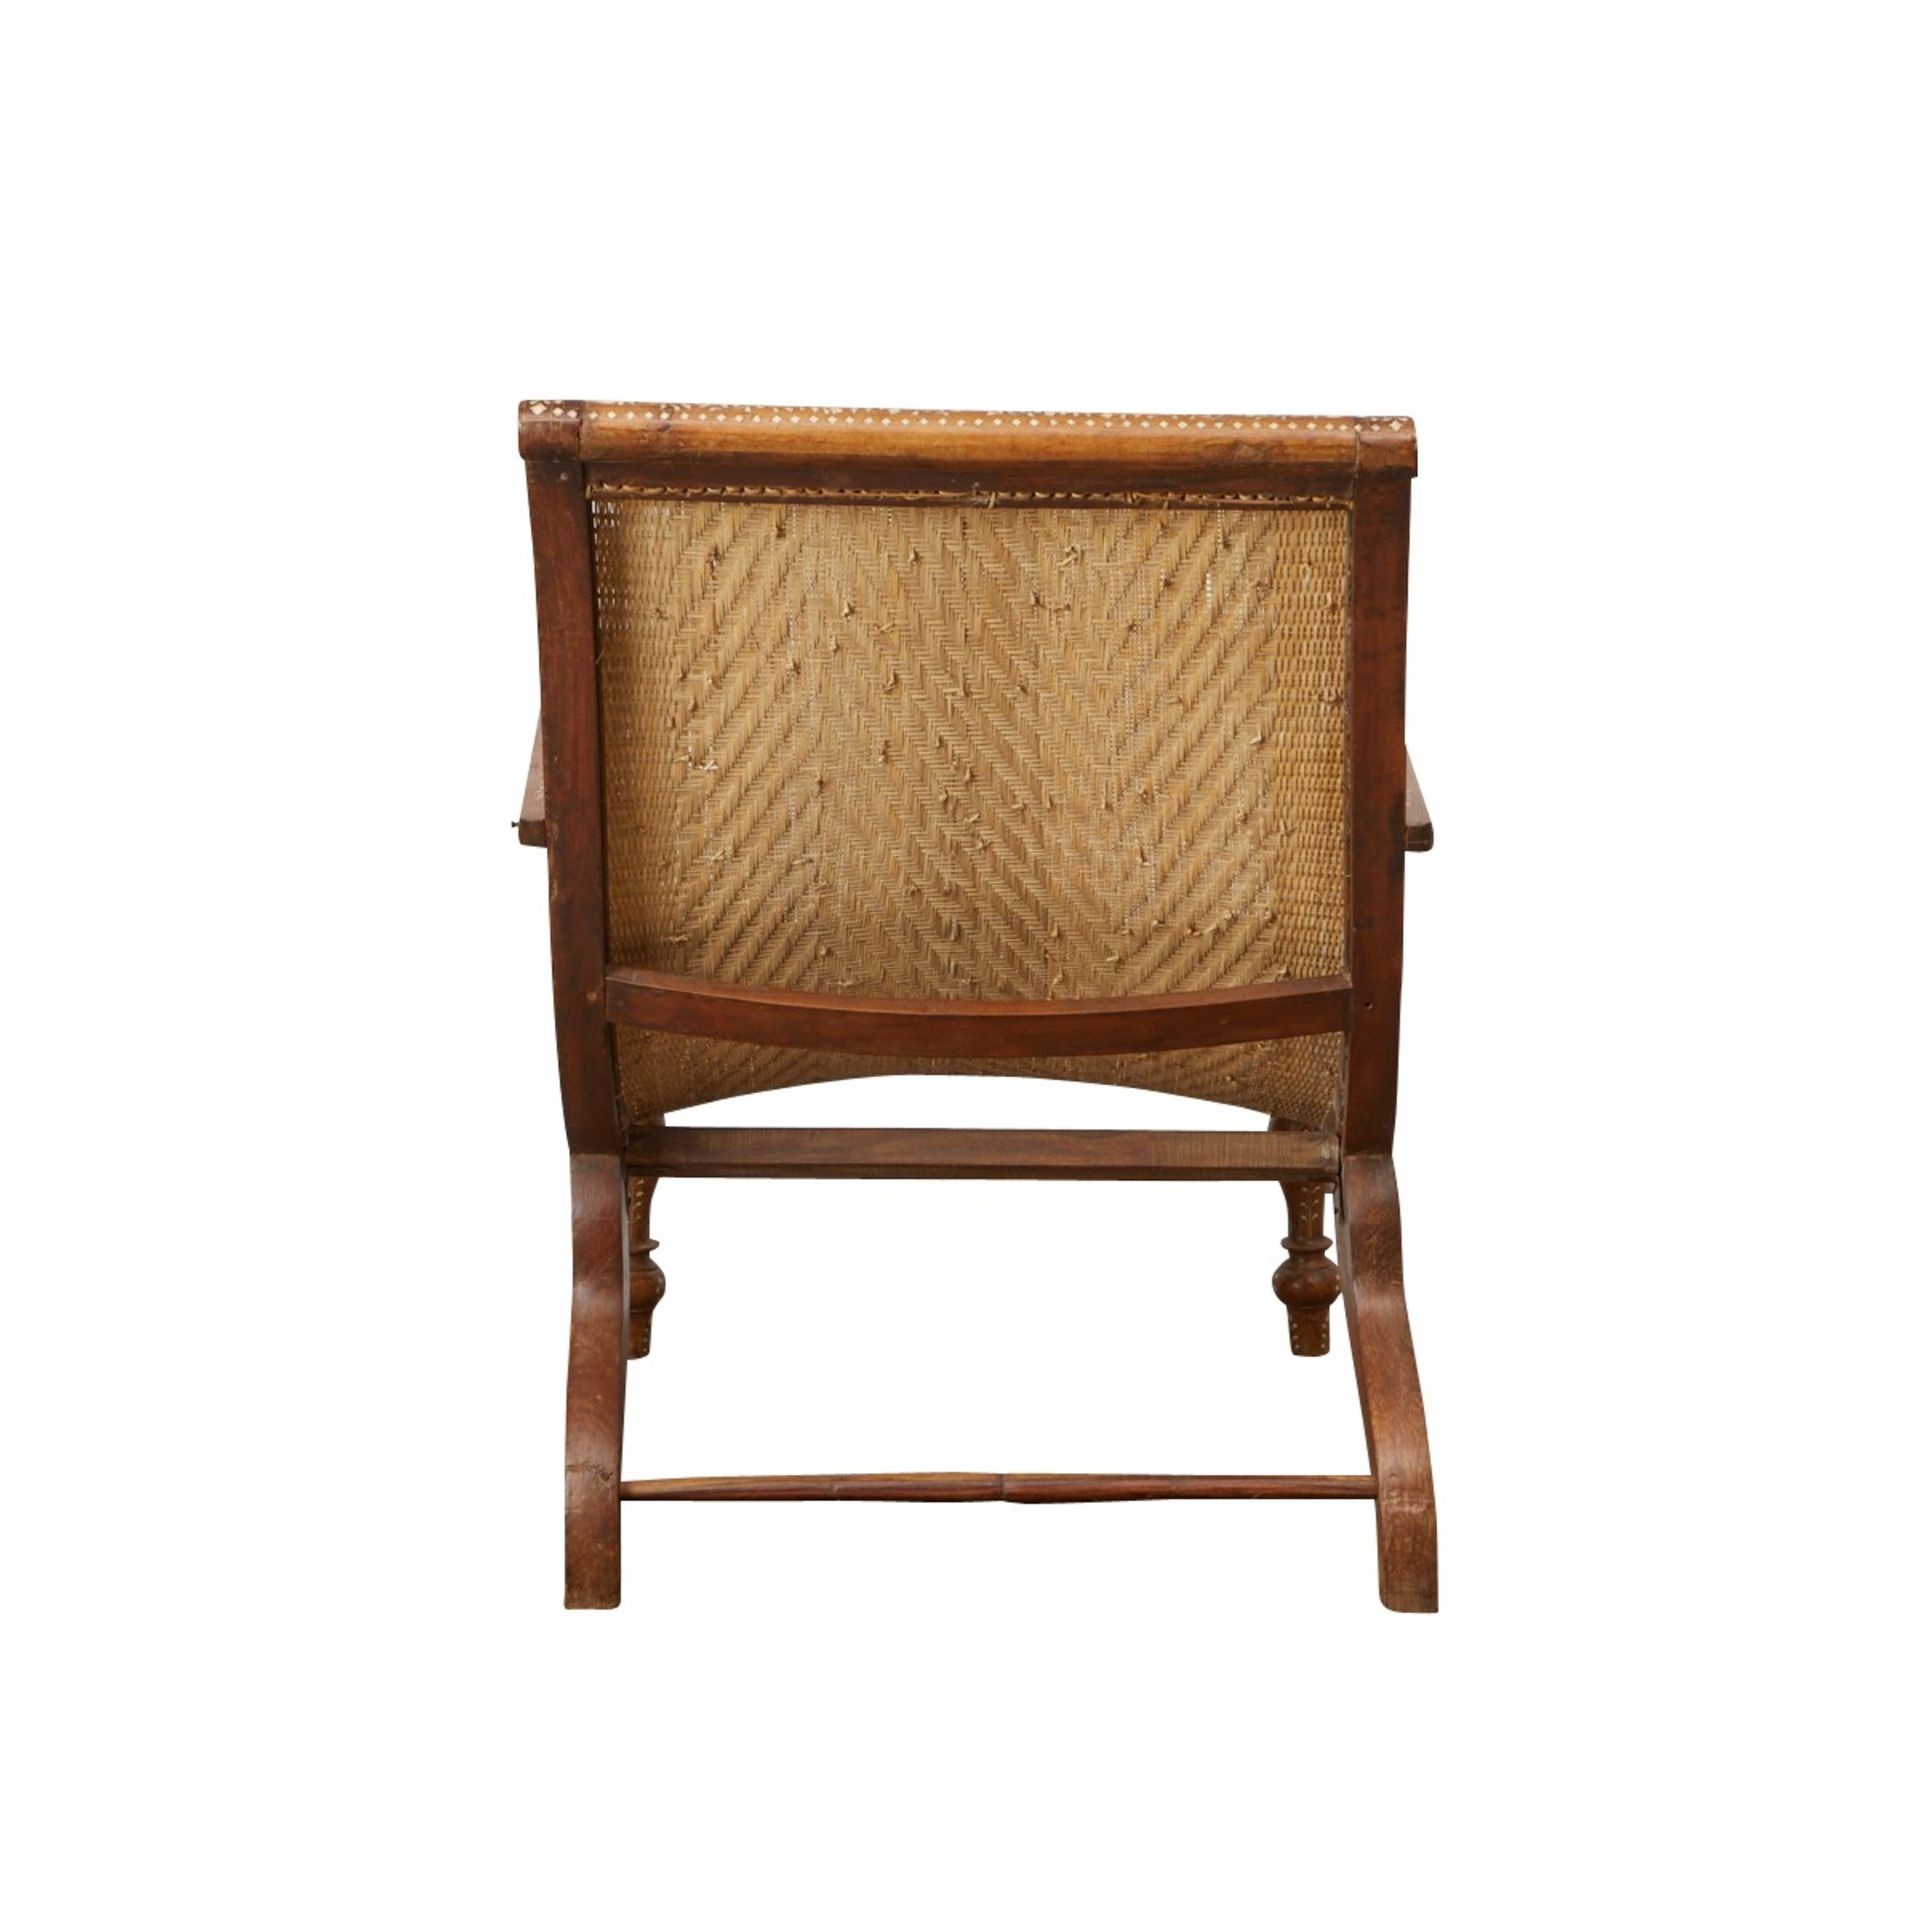 Syrian Inlaid Mother of Pearl Plantation Chair - Image 12 of 16